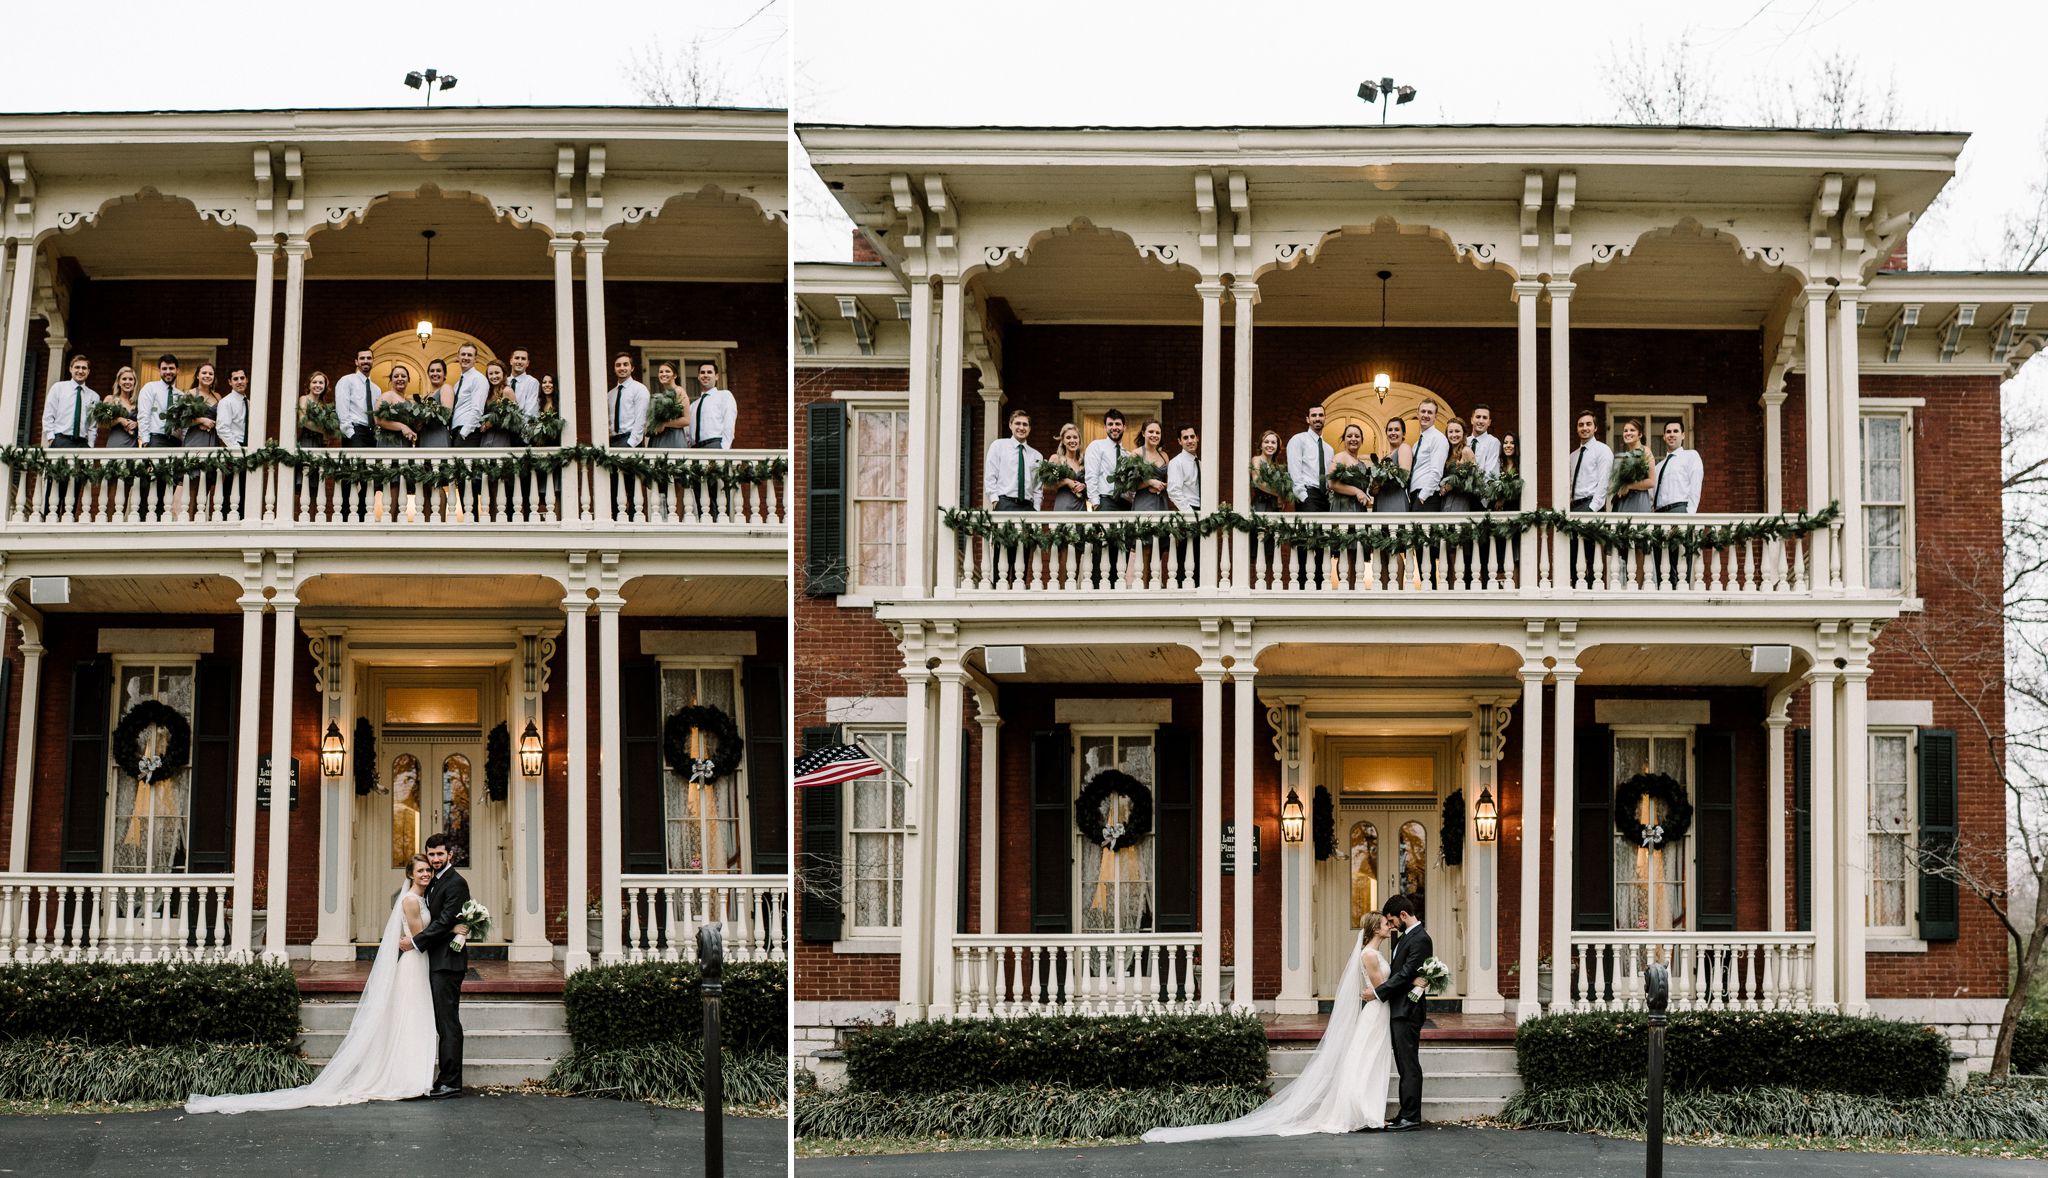 A bride and groom stand on the front steps of the Larimore House while their wedding party stands on the second floor porch. The house is fully decorated for Christmas. 